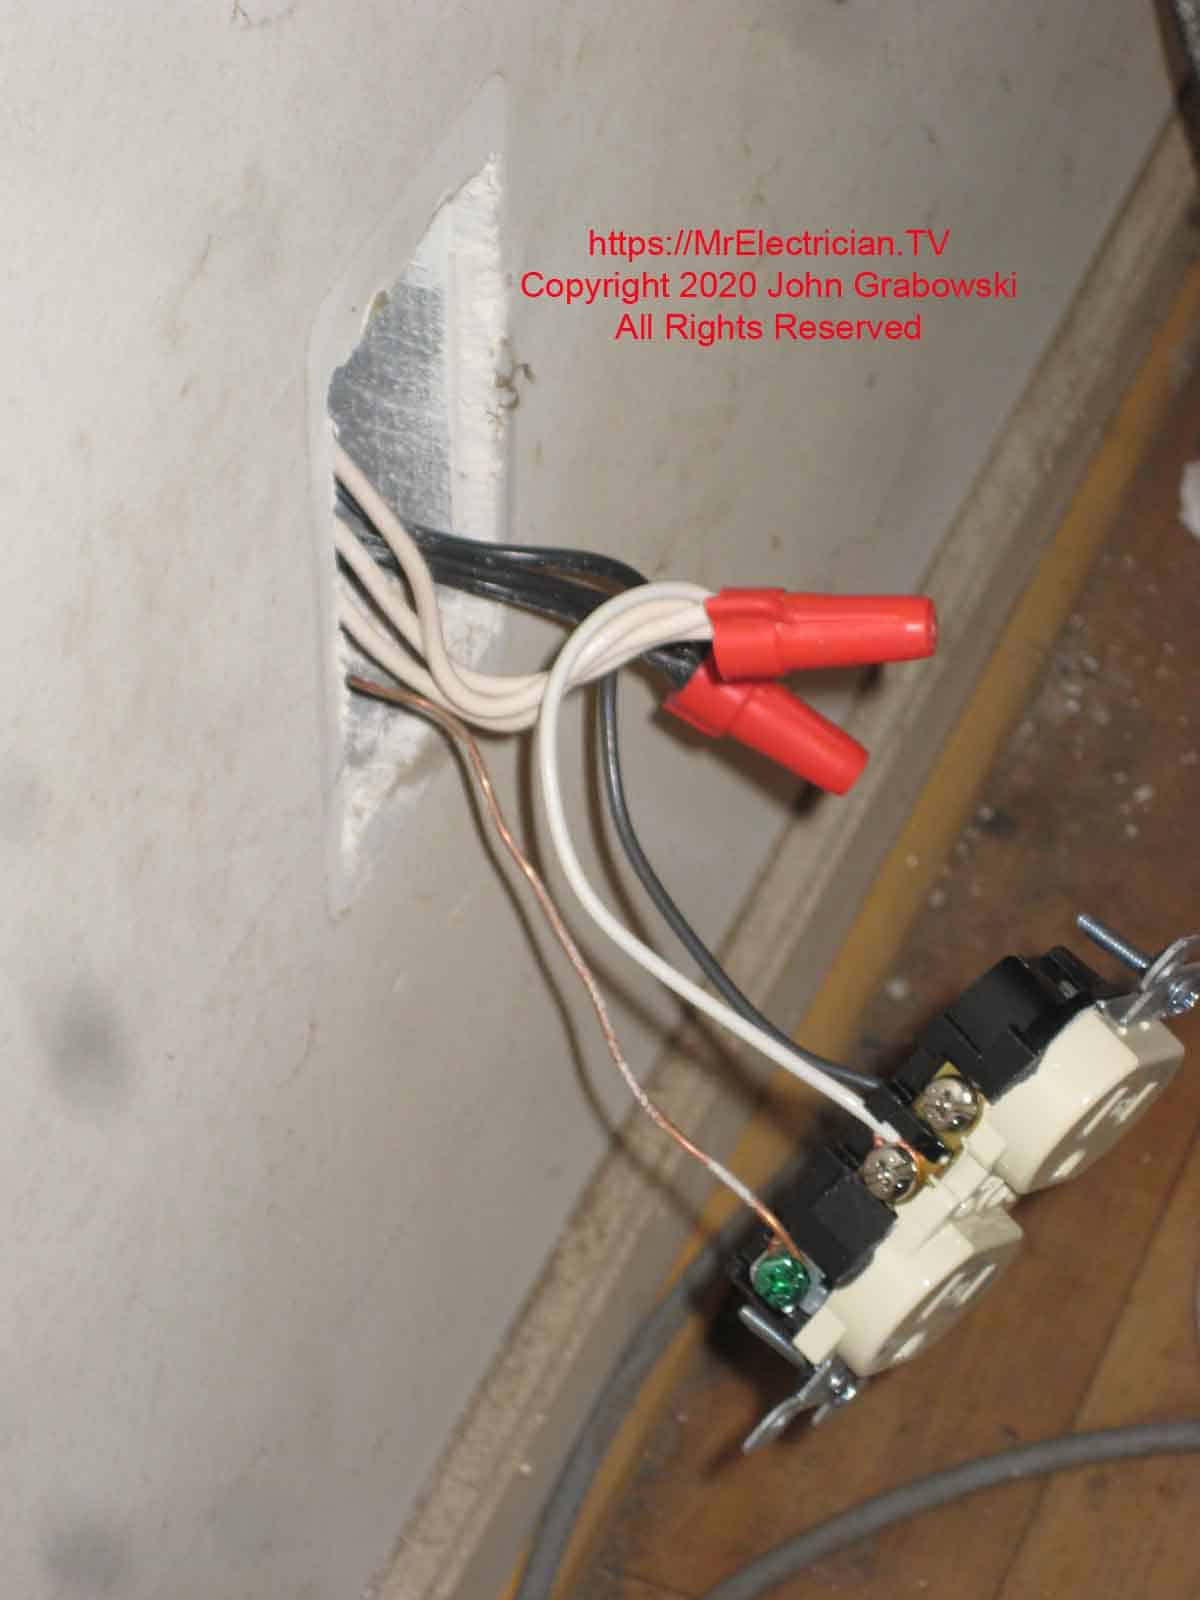 Electrical wall outlet pulled from wall and converted from being switched by using pigtails